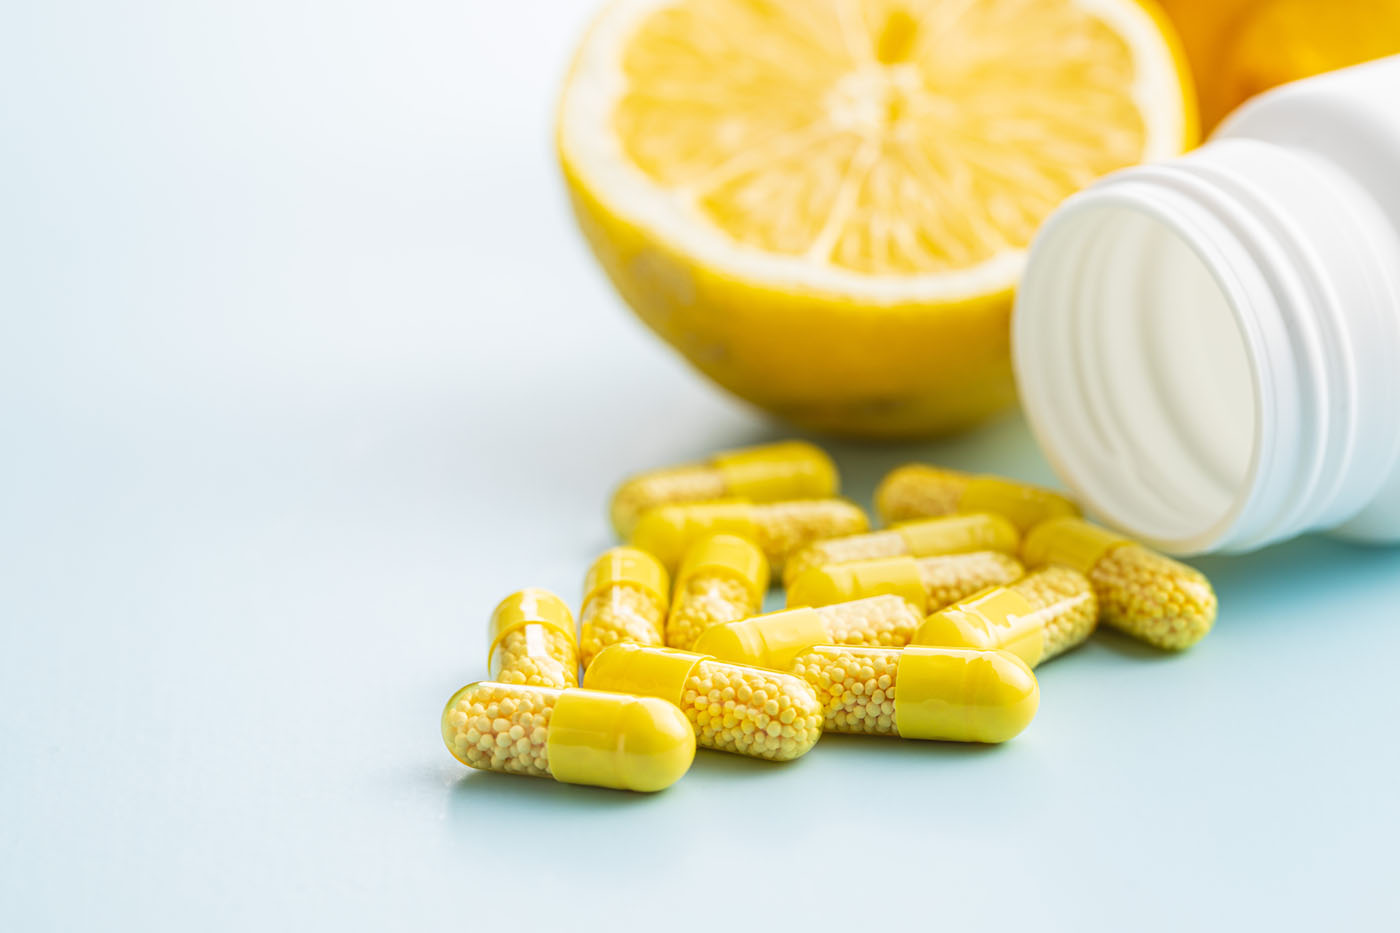 Vitamin C supplements for your immune system